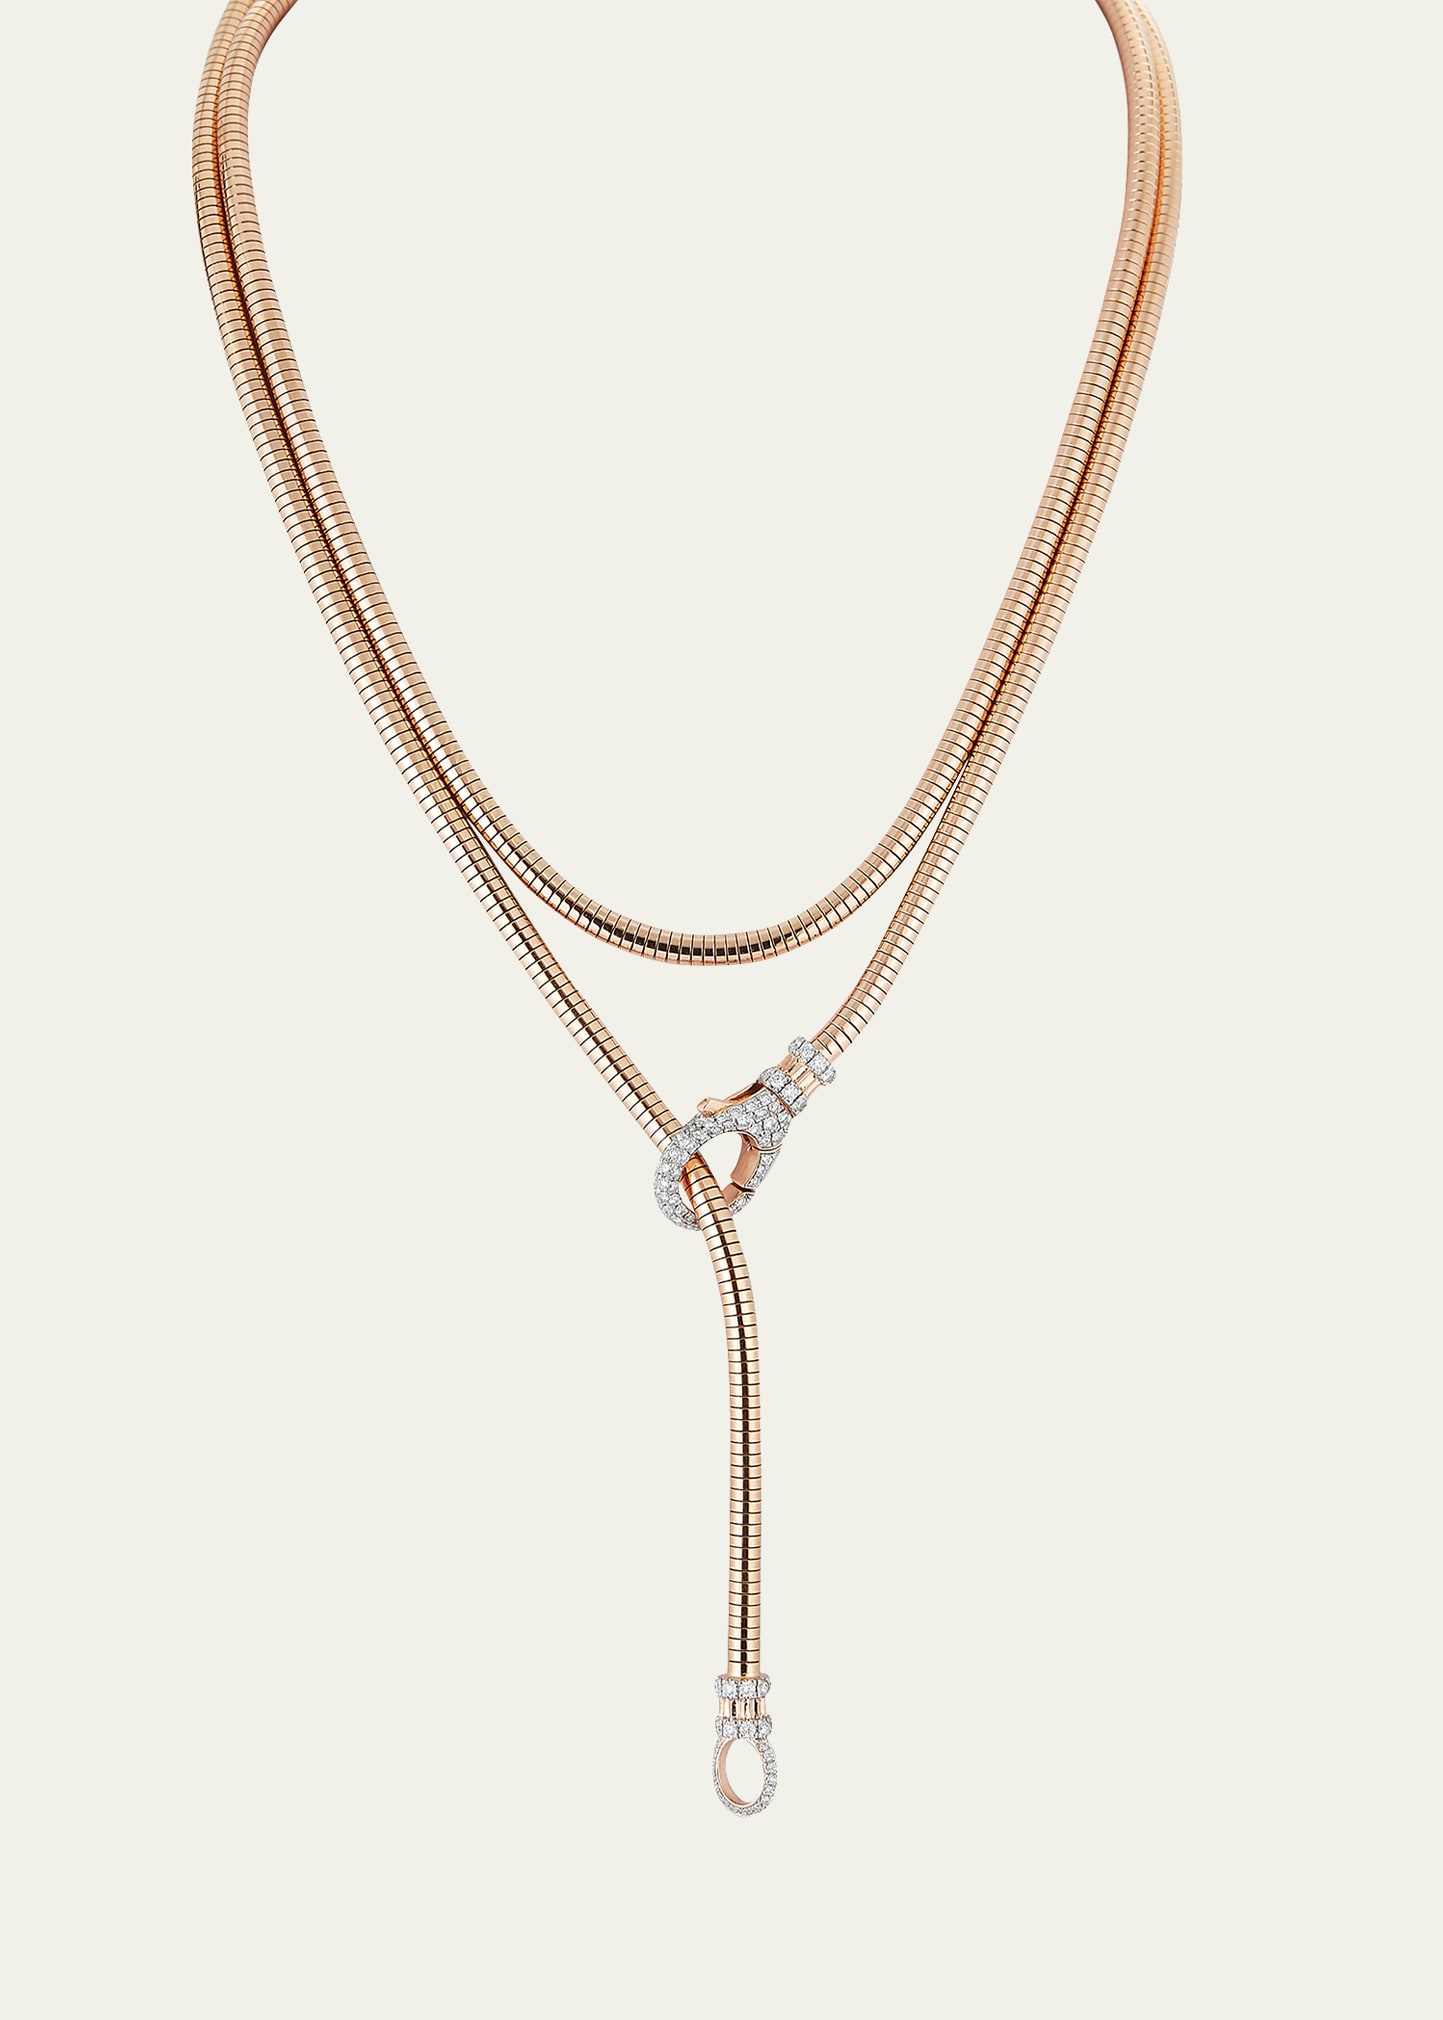 Walters Faith Clive 18k Rose Gold All Diamond Chain Wrap Necklace